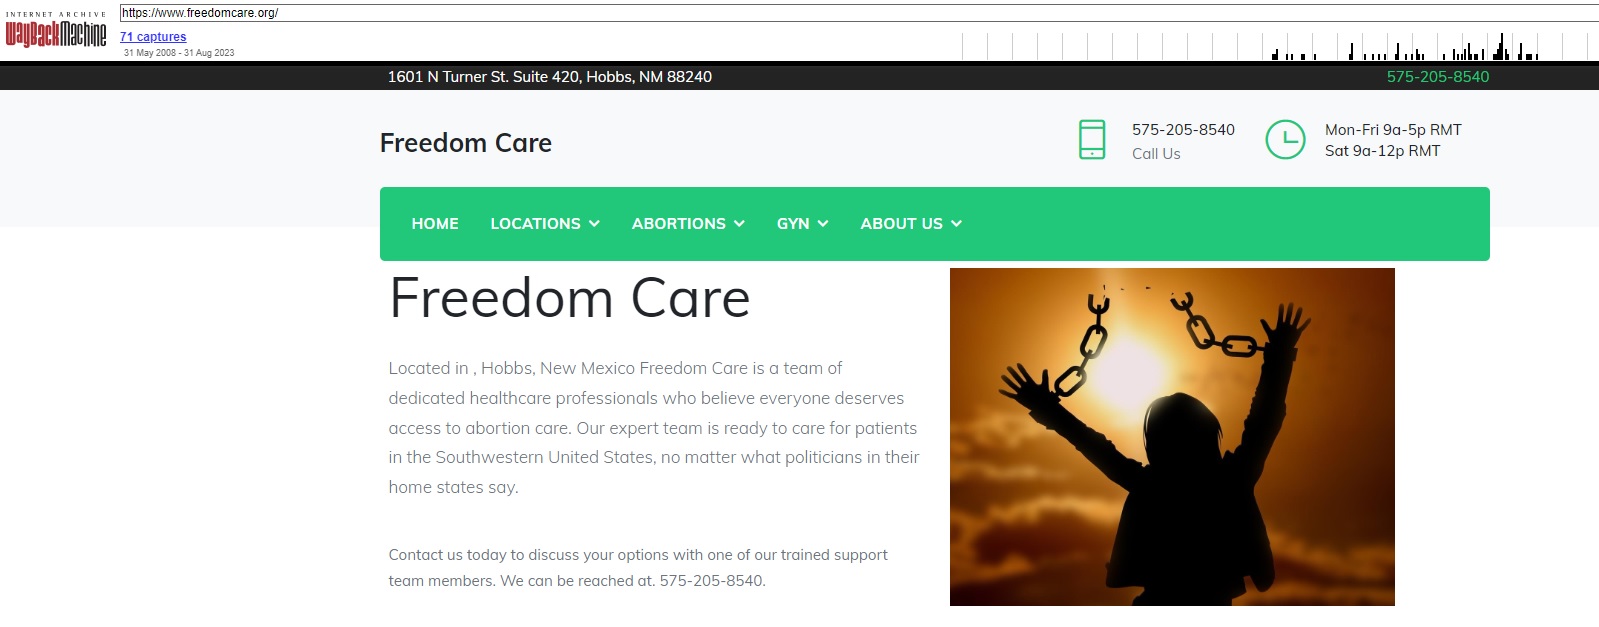 Freedom Care abortion Clinic Hobbs Nm owned by Brigham archive from March 2023